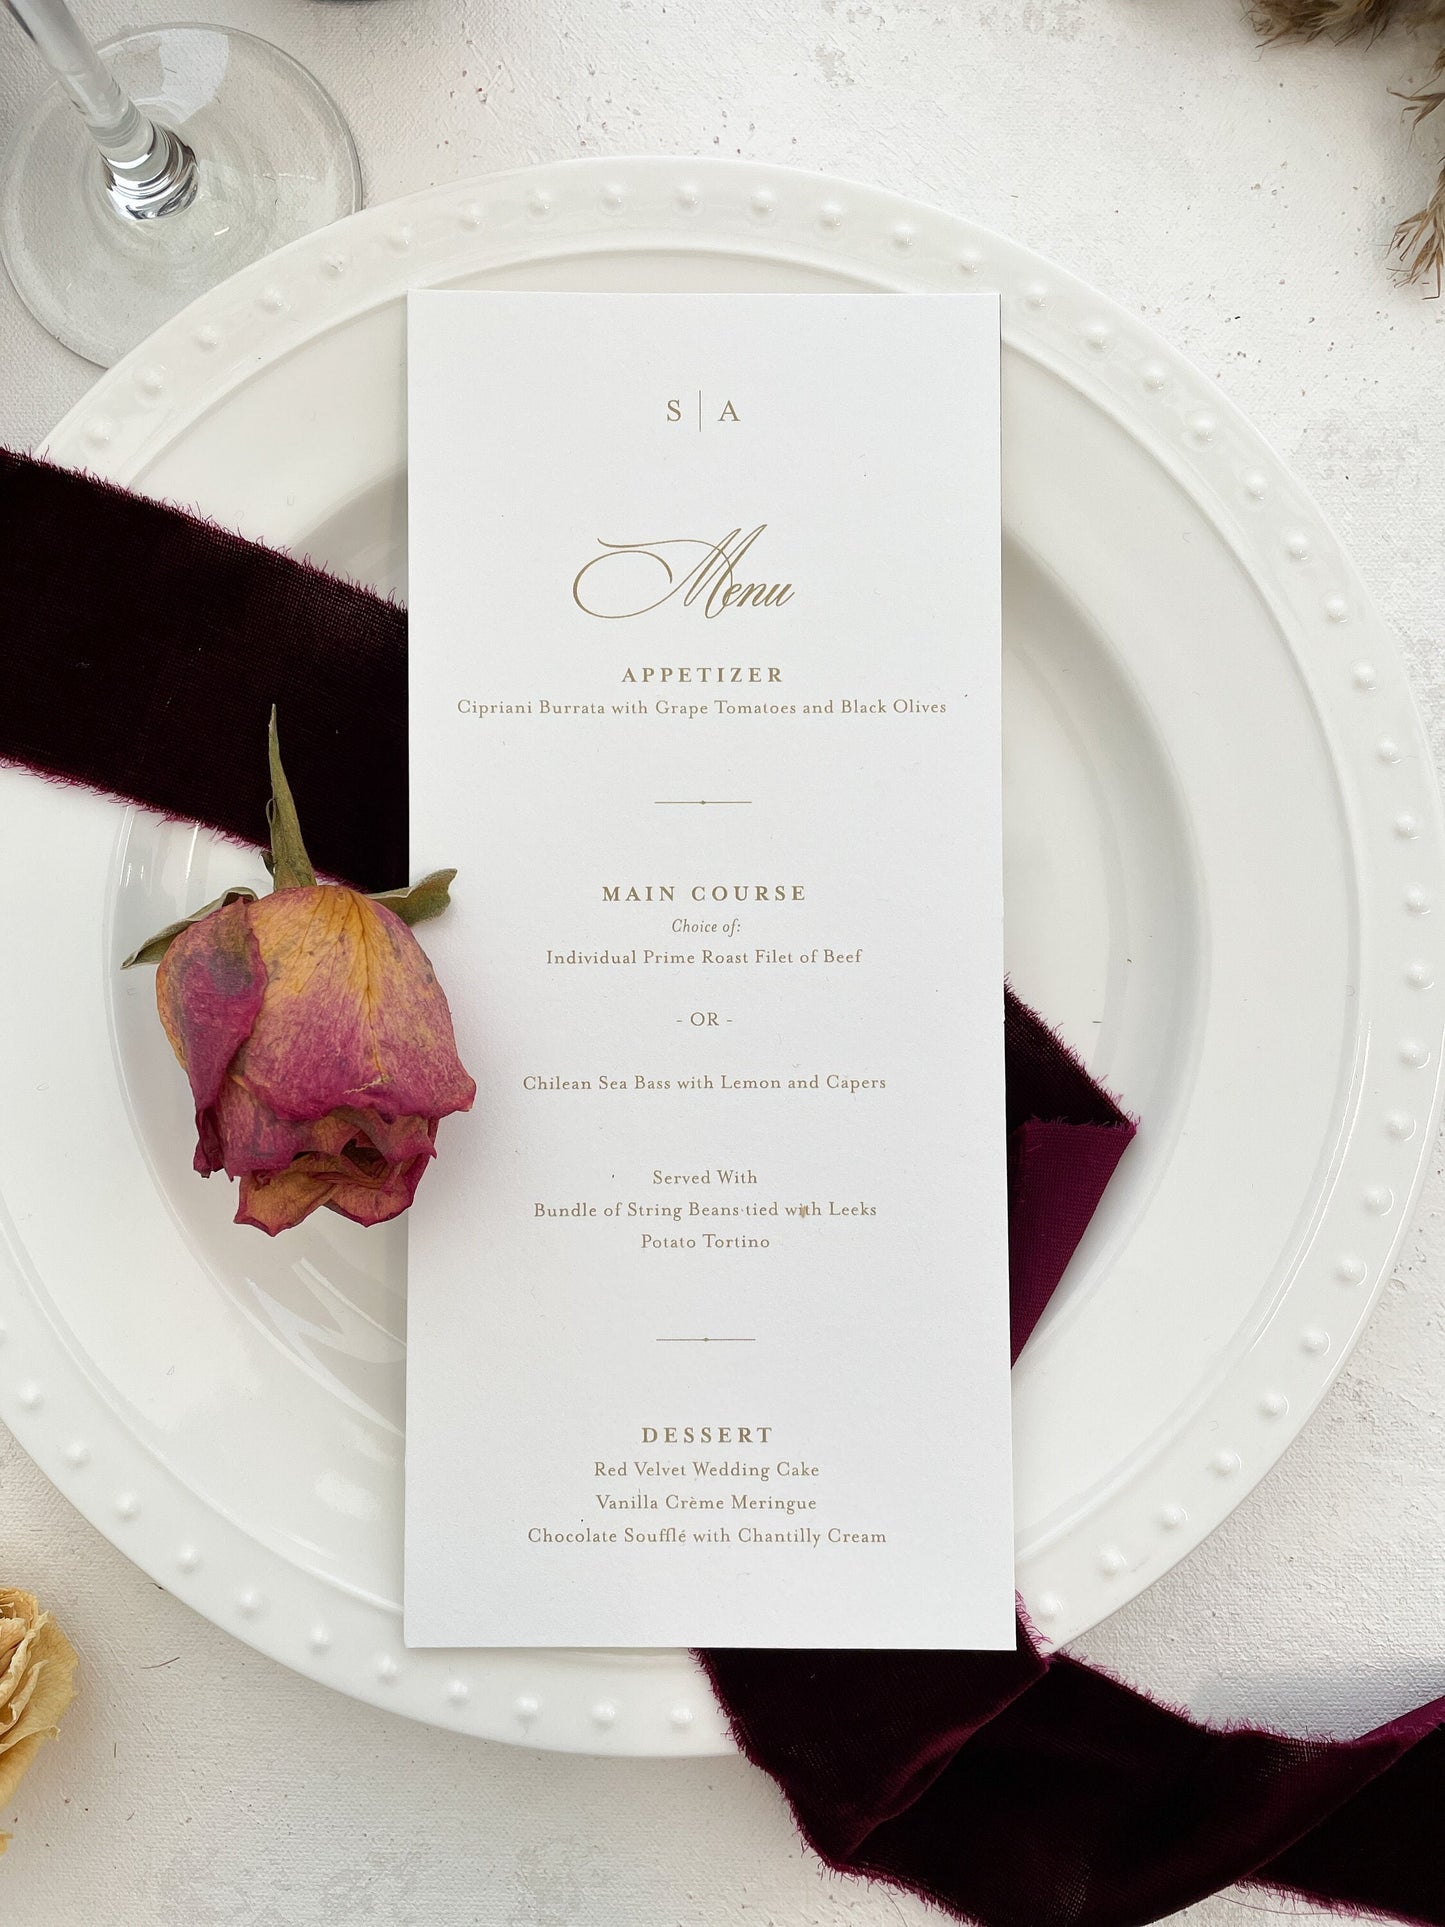 Champagne text with monogram menu